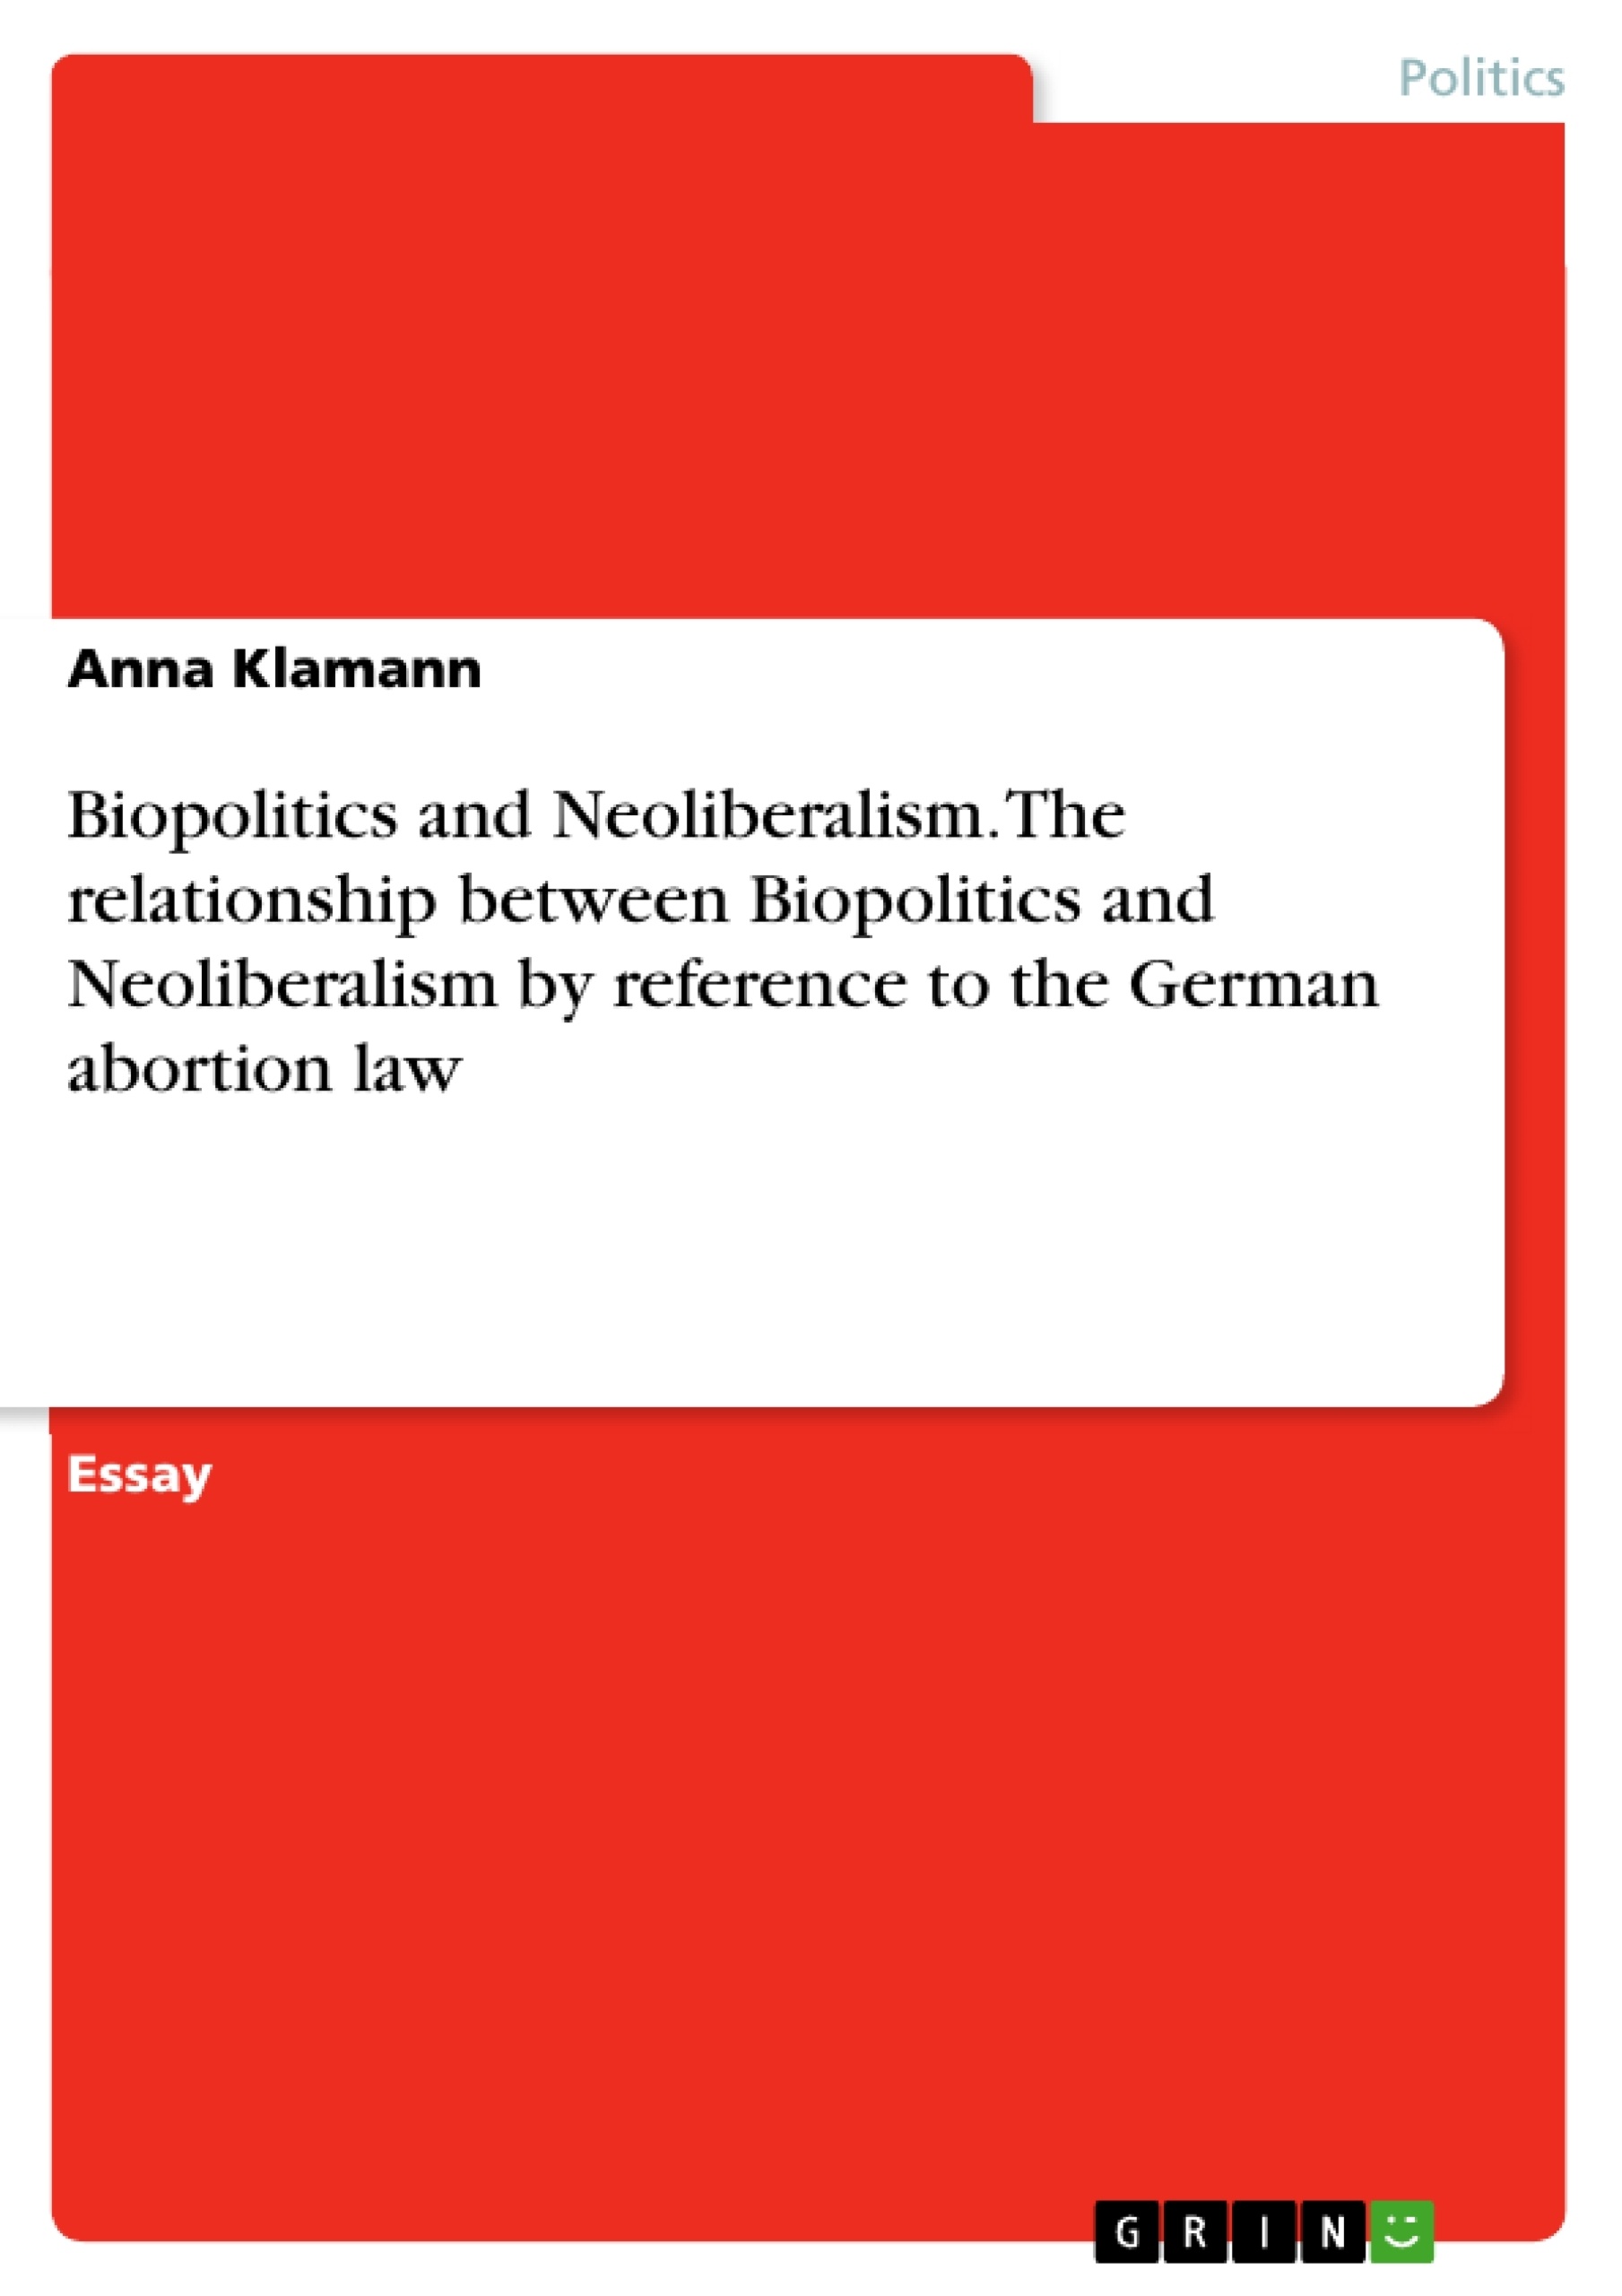 Título: Biopolitics and Neoliberalism. The relationship between Biopolitics and Neoliberalism by reference to the German abortion law